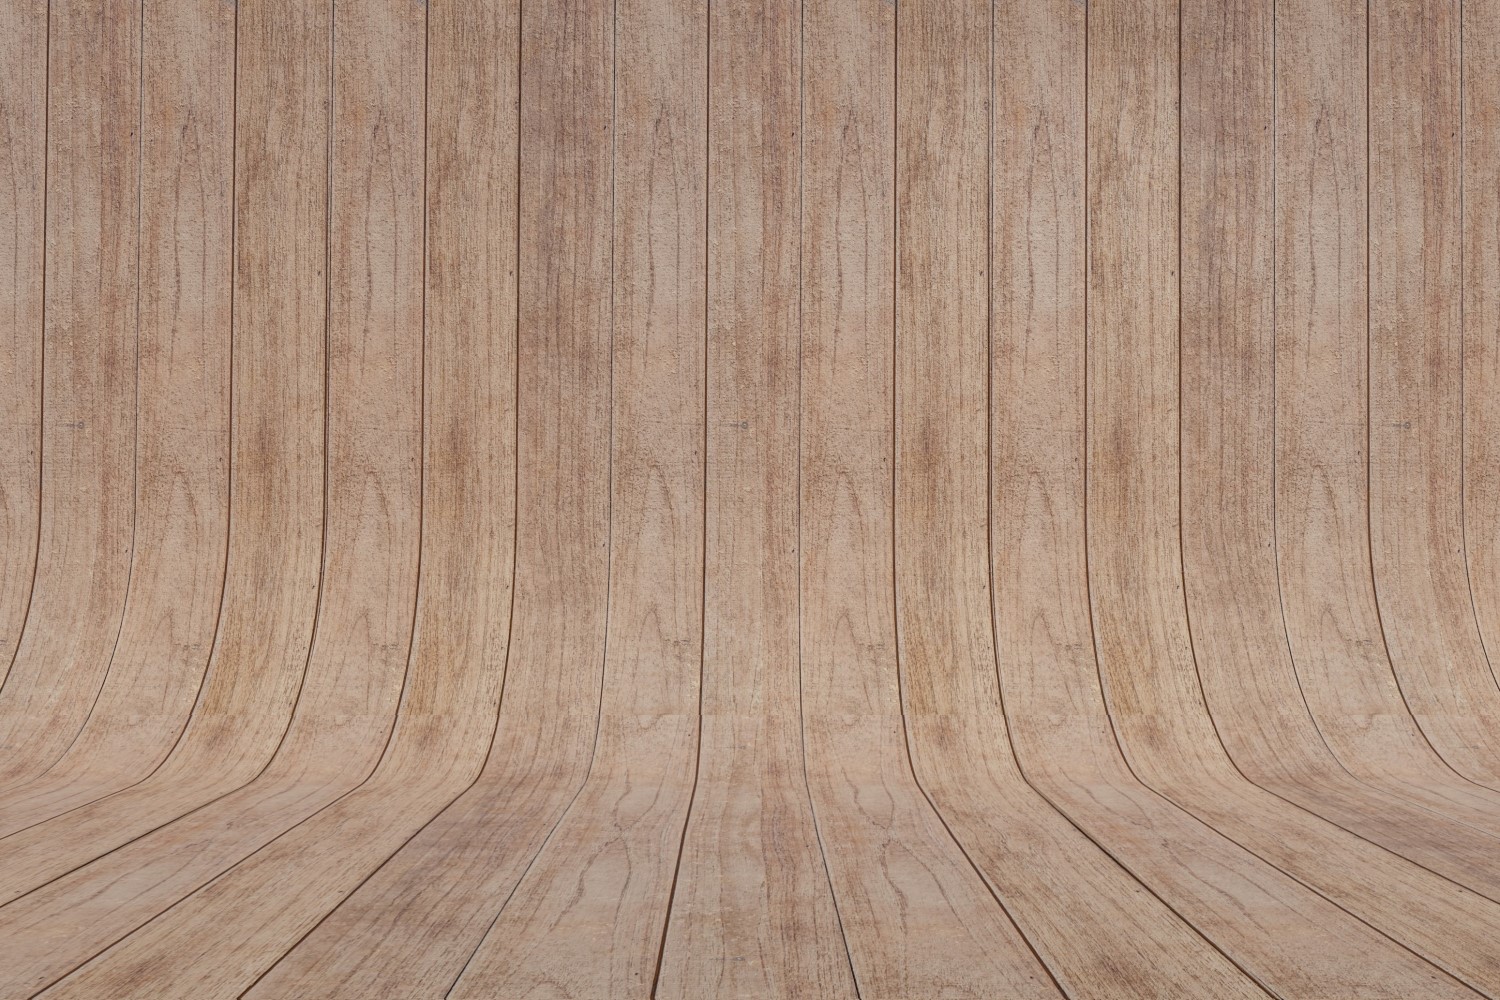 Curved Taupe Color Wood Parquet background